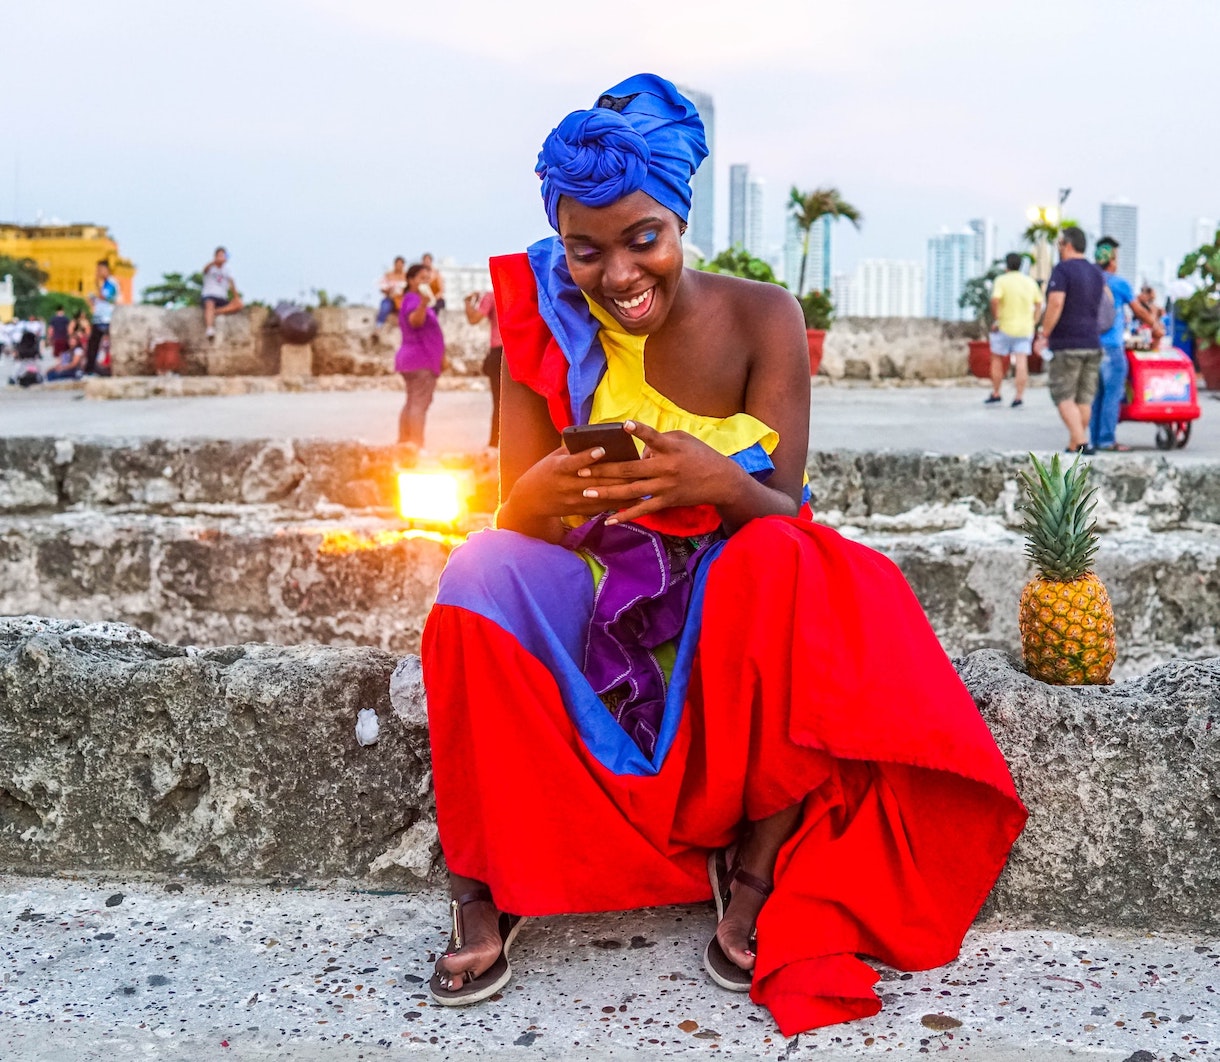 7 Of The Most Instagrammable Locations In Cartagena, Colombia